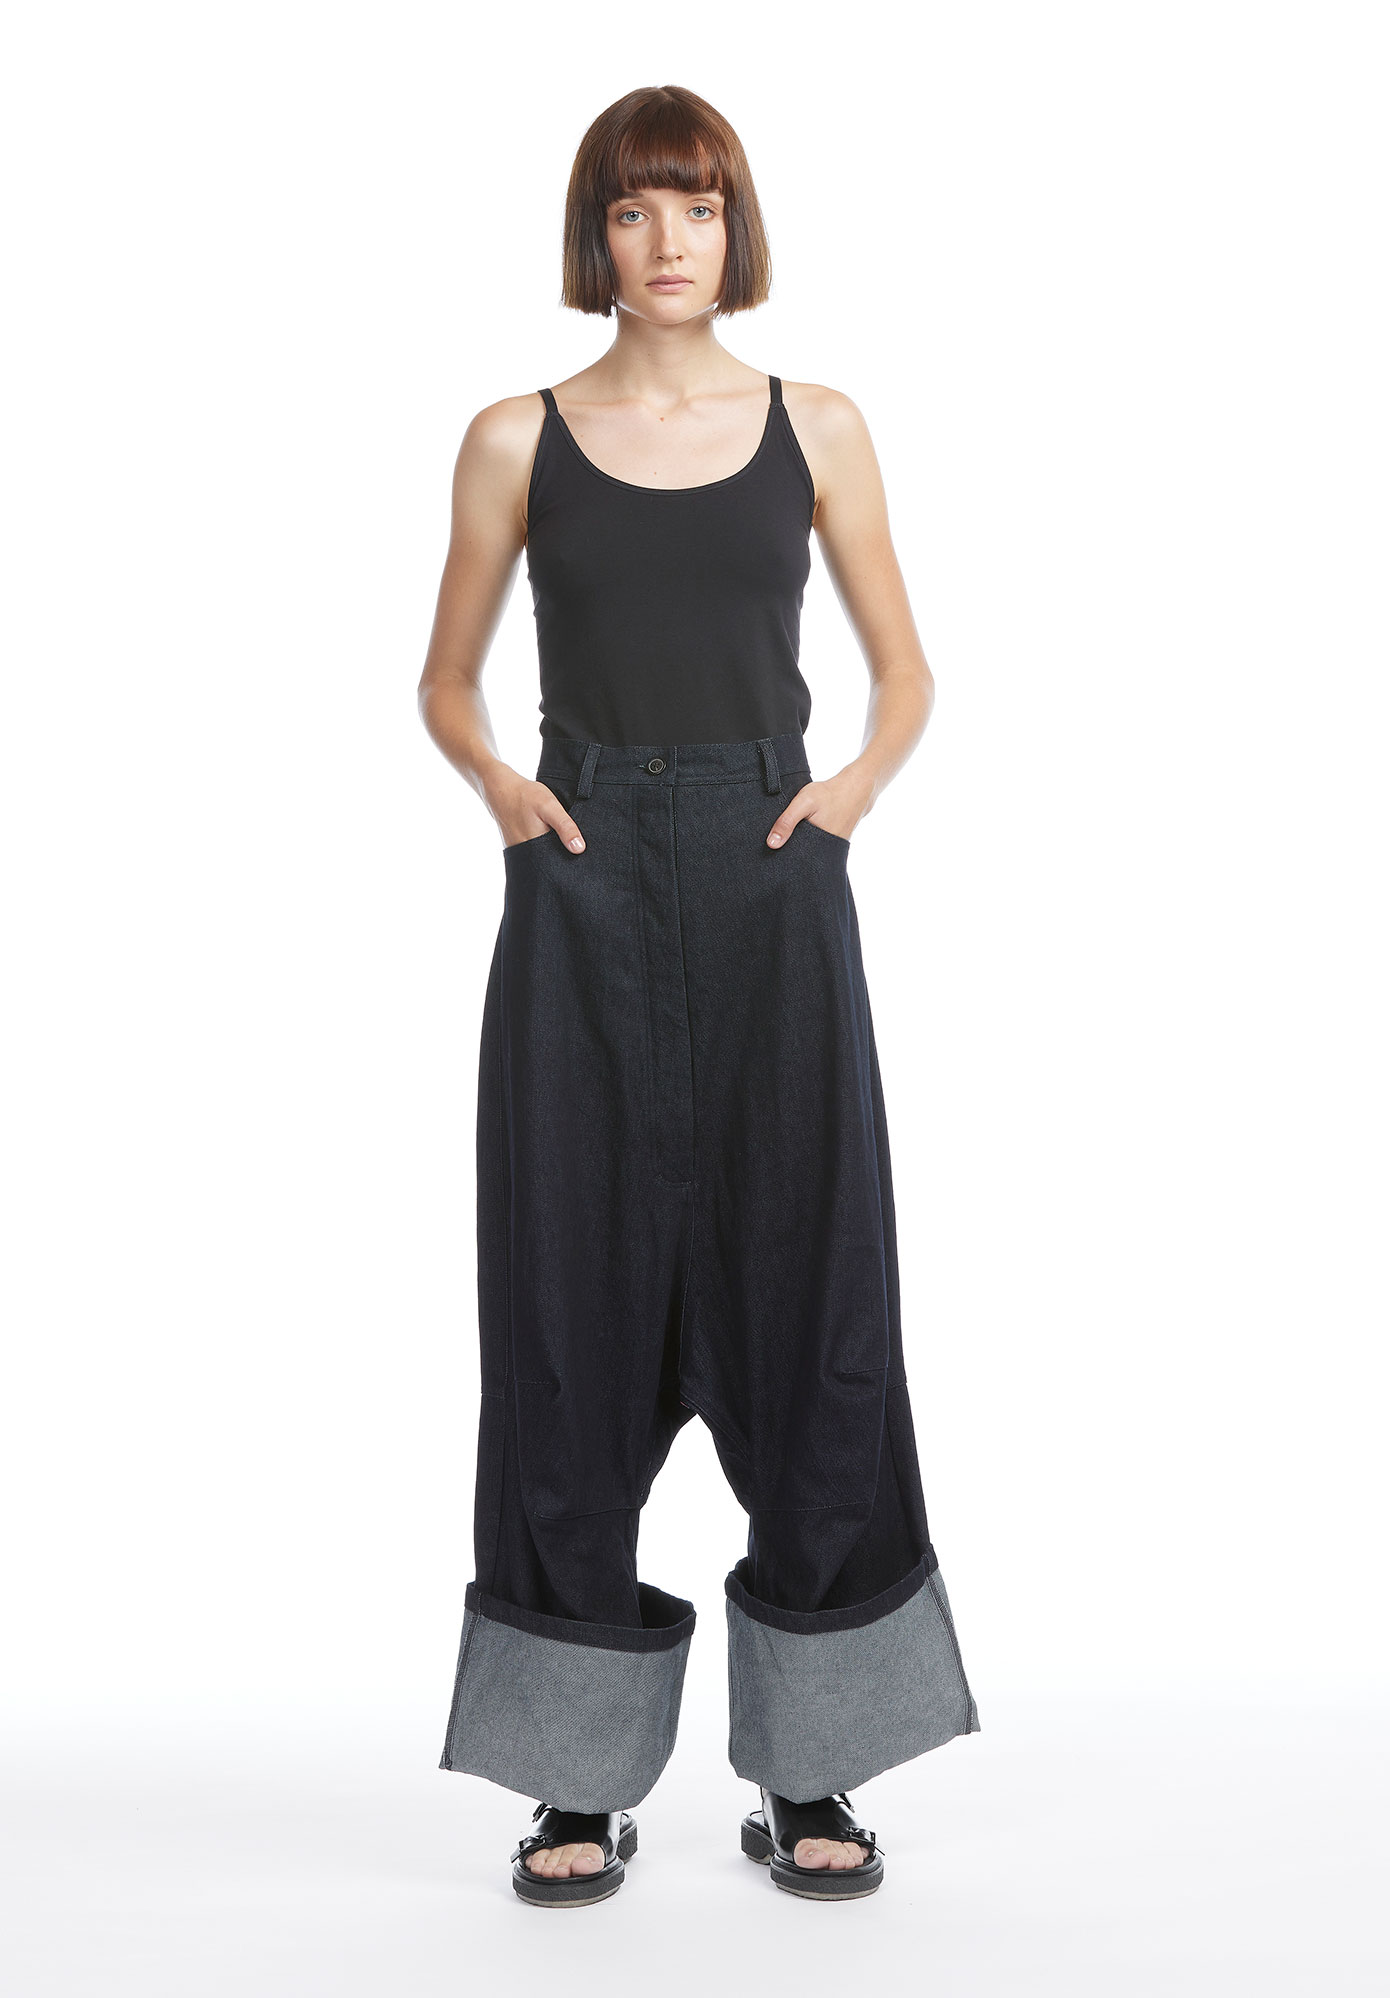 RUNDHOLZ 1080121 RAW DENIM DEEP CUFF TROUSER WIDE LEG
Oversized relaxed fit drop crotch dark denim pant in jean, features wide leg with high turned cuff
Model also wears
Adieu Paris TYPE 140 Sandal in Black
Pieces featured are from Autumn Winter collection
Full length front view of model in pant